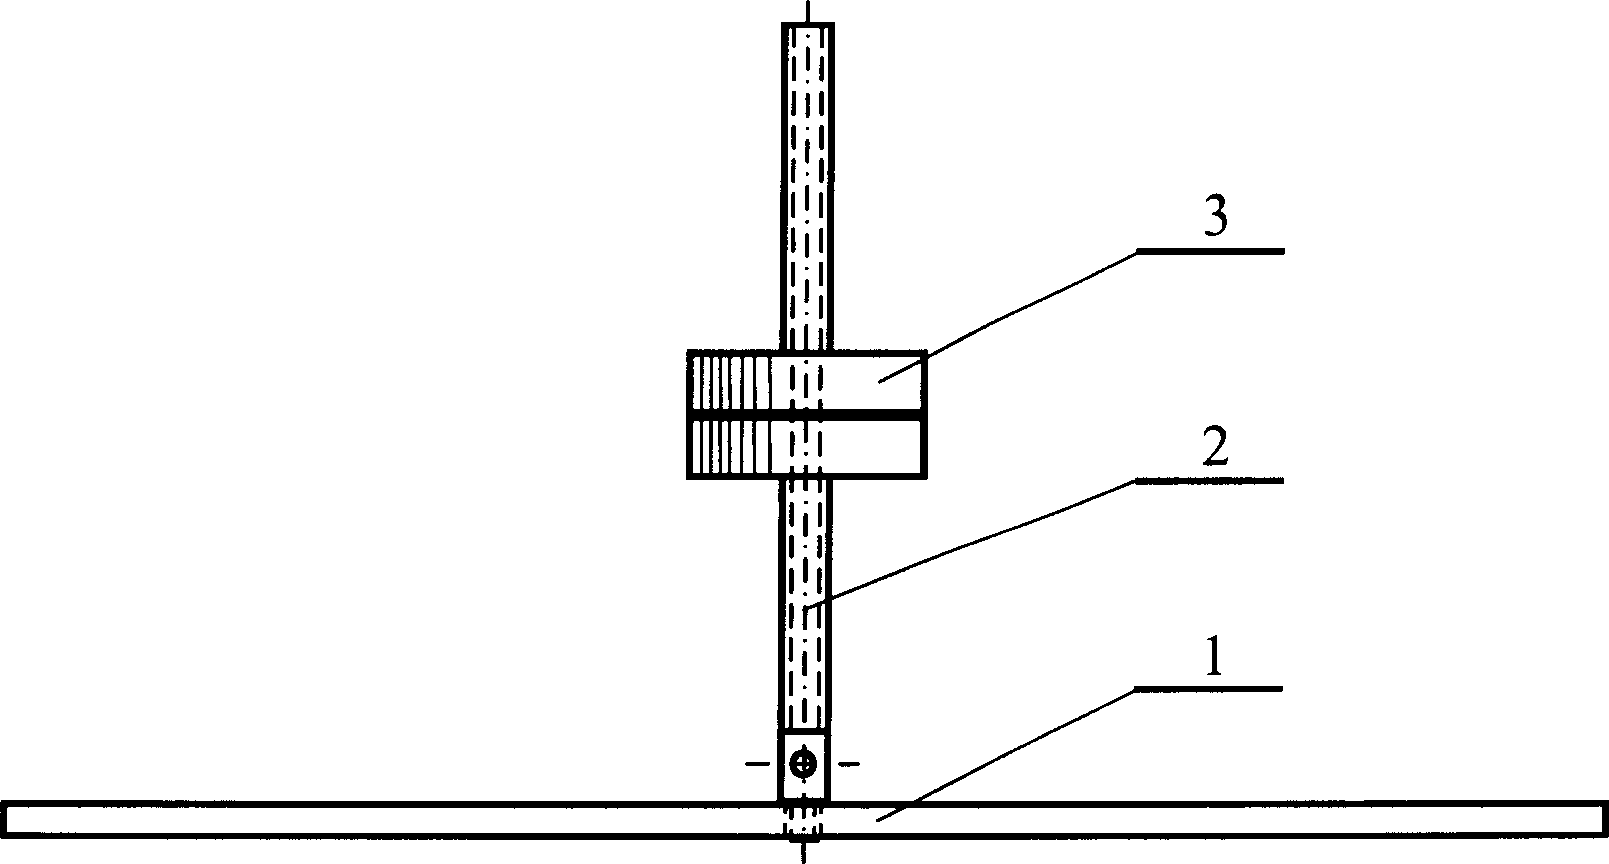 Externally loading centroid adjuster of air-floating rotating table